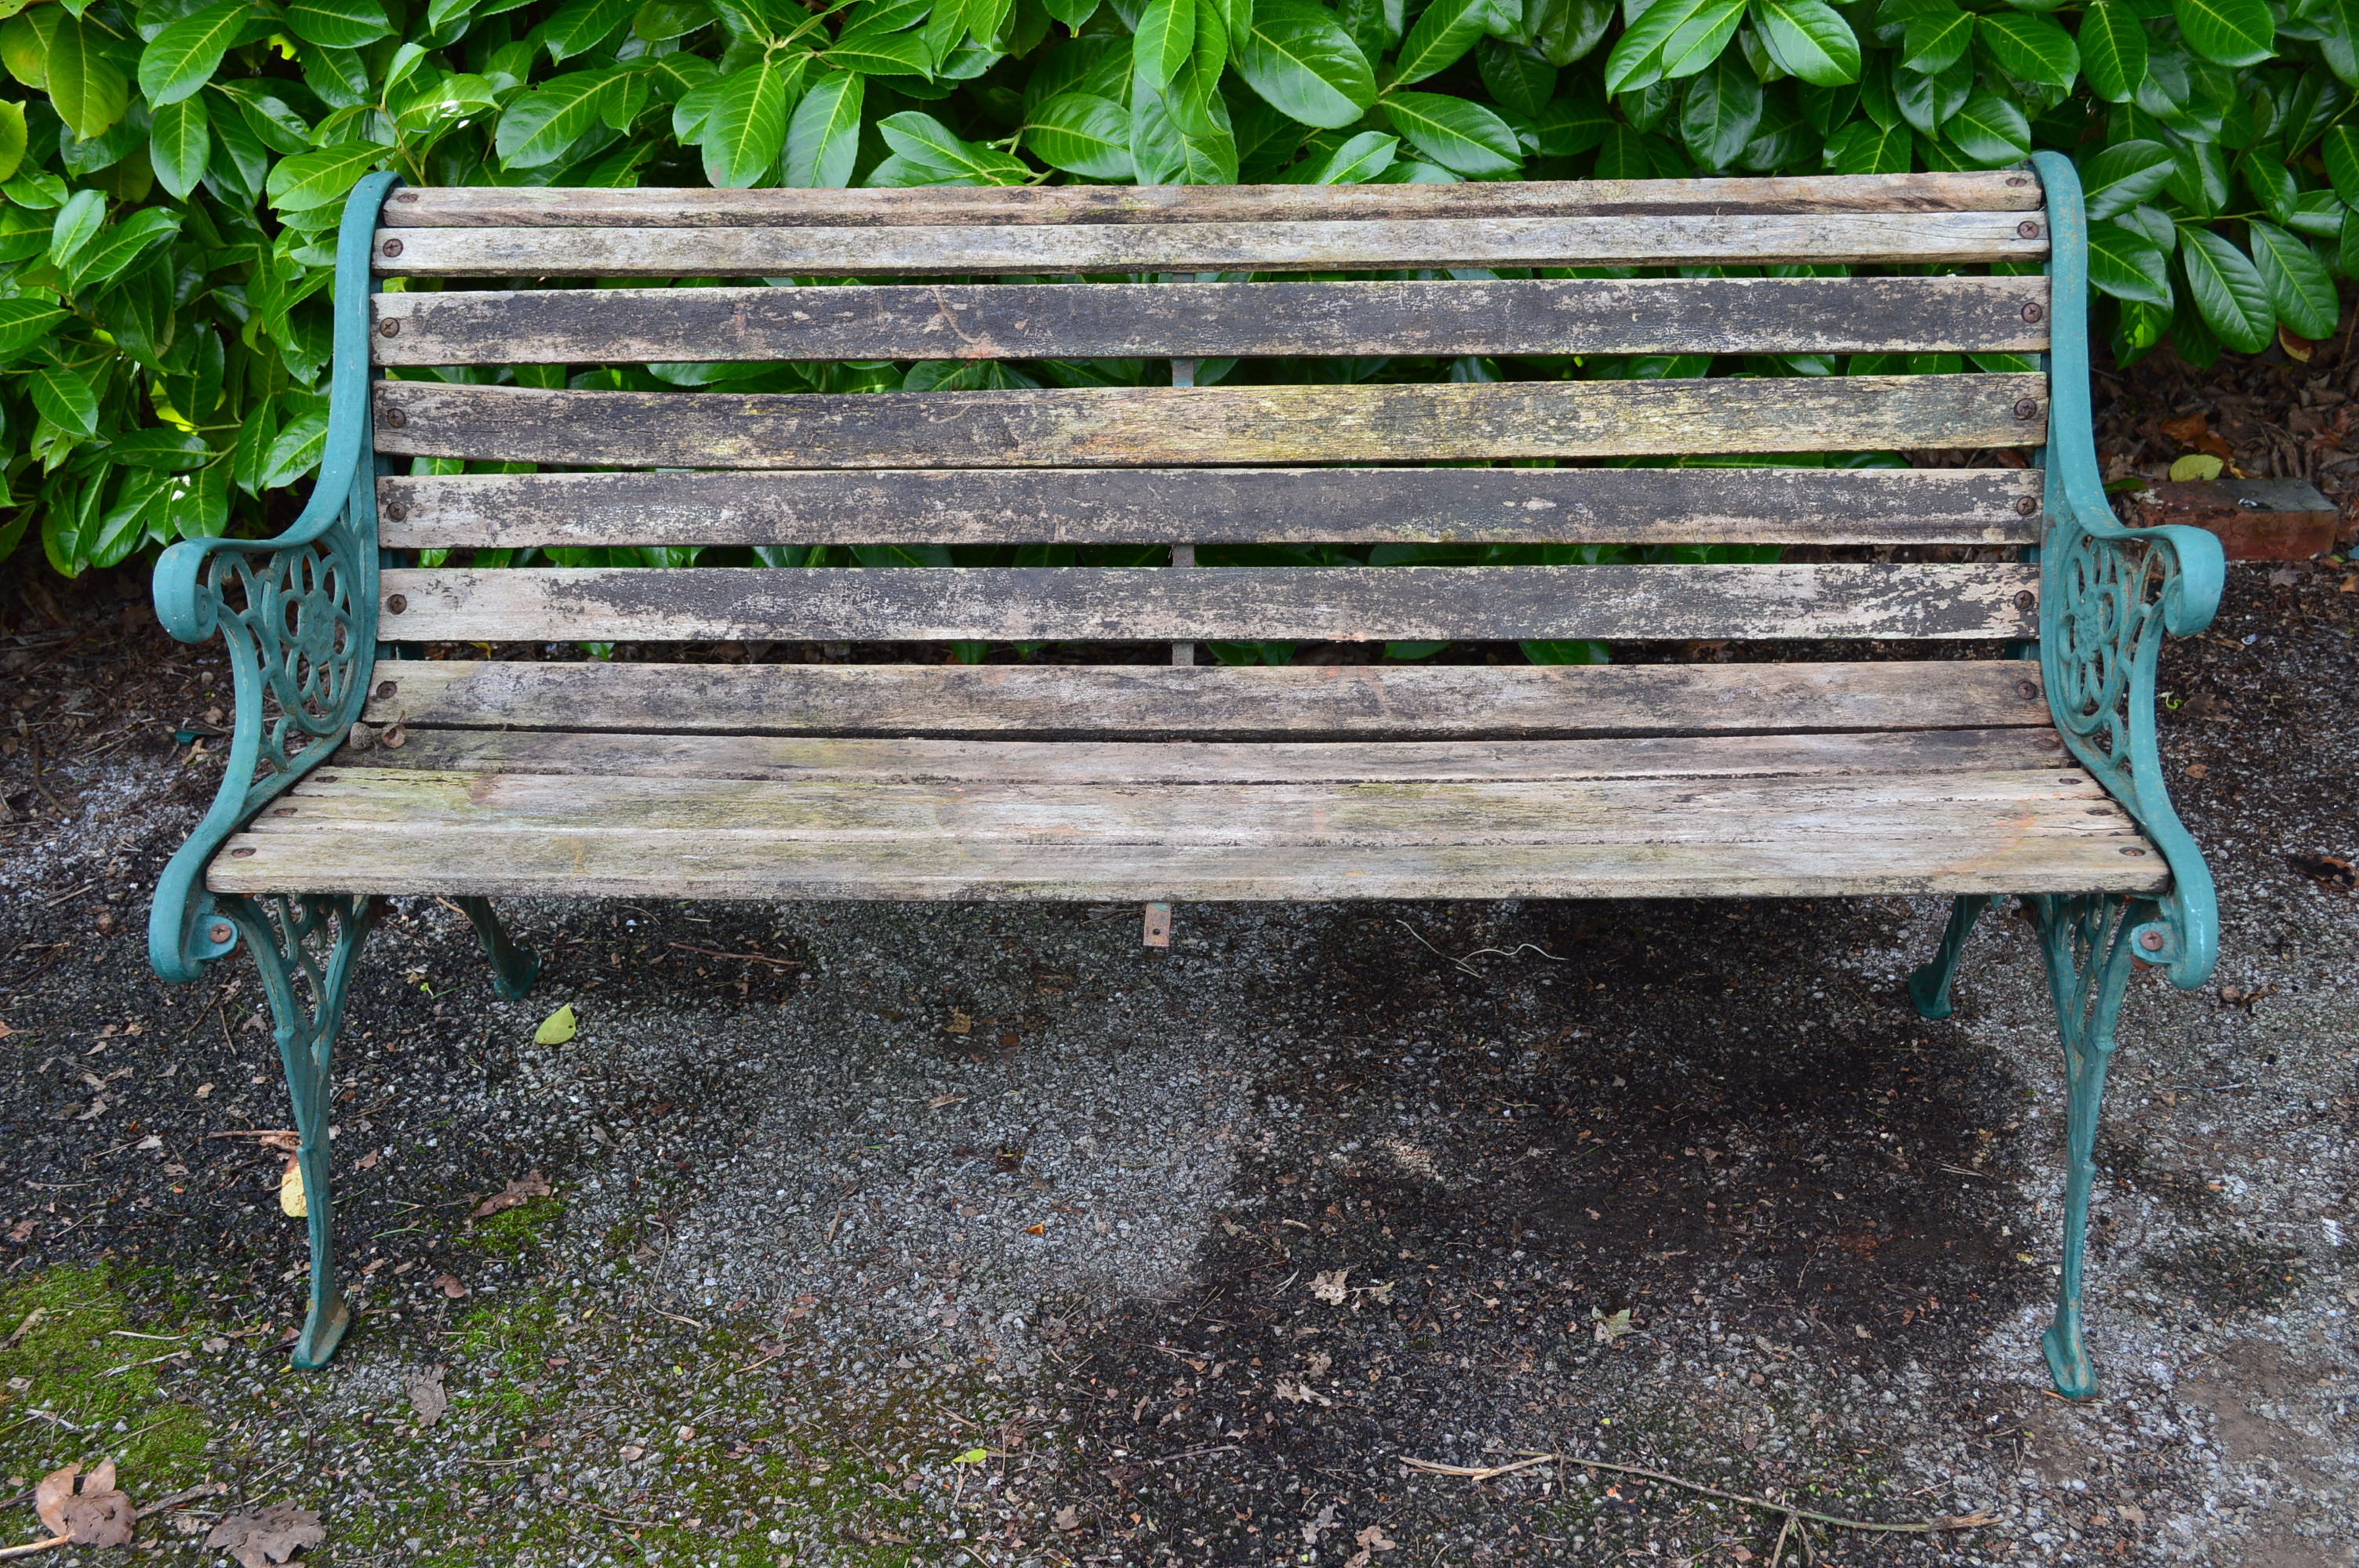 Wooden slatted garden bench with iron ends